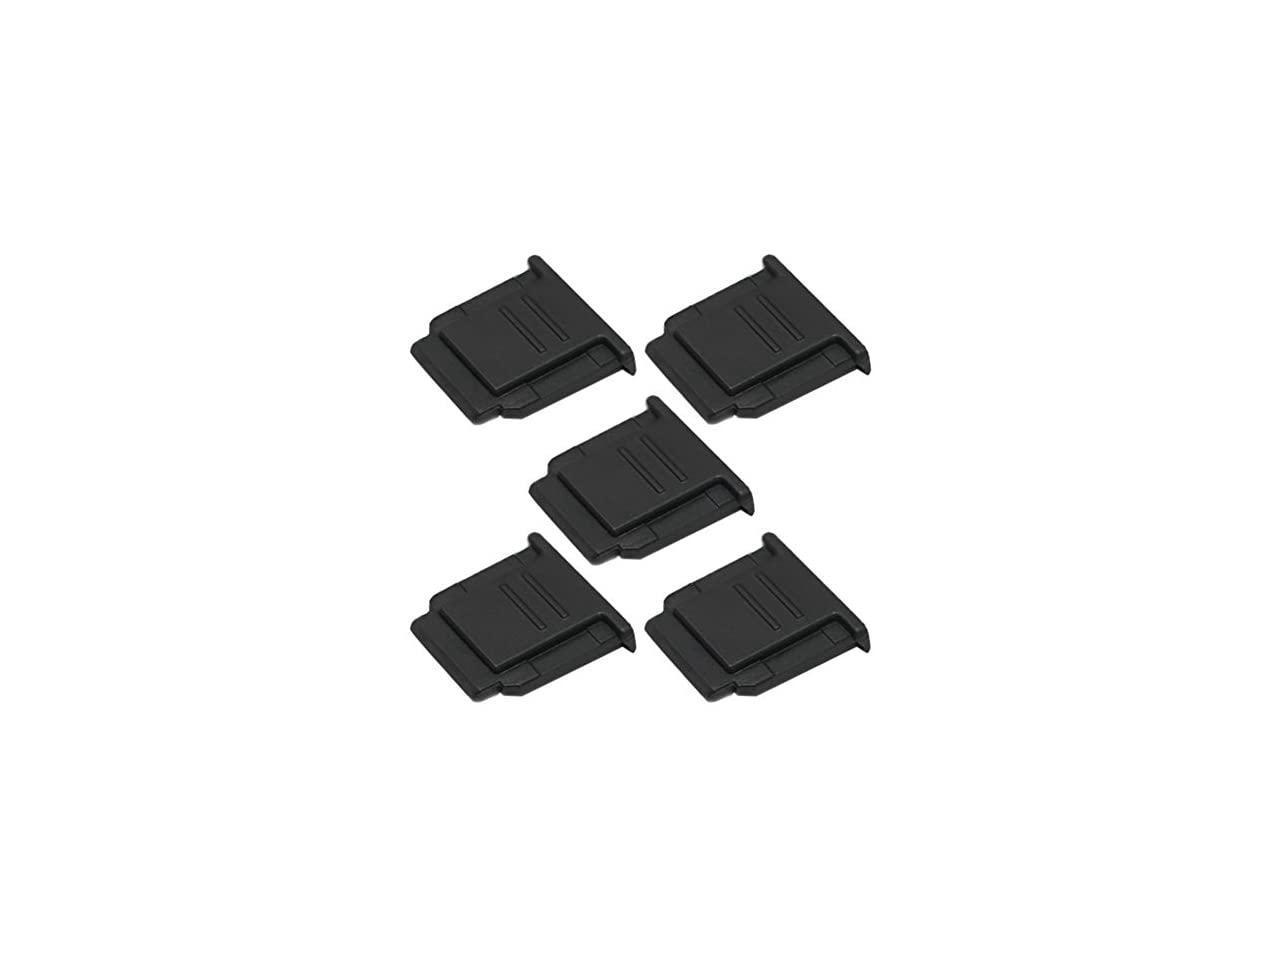 1-Pack Hot Shoe Protector Compatible with Sony A6100 A6600 A7III A6500 A6400 A6300 A6000 A77II A7II A7RIII A7RIV A7SII RX1RII RX10II RX100II Replaces FA-SHC1M Hot Shoe Cap VKO Metal Hot Shoe Cover